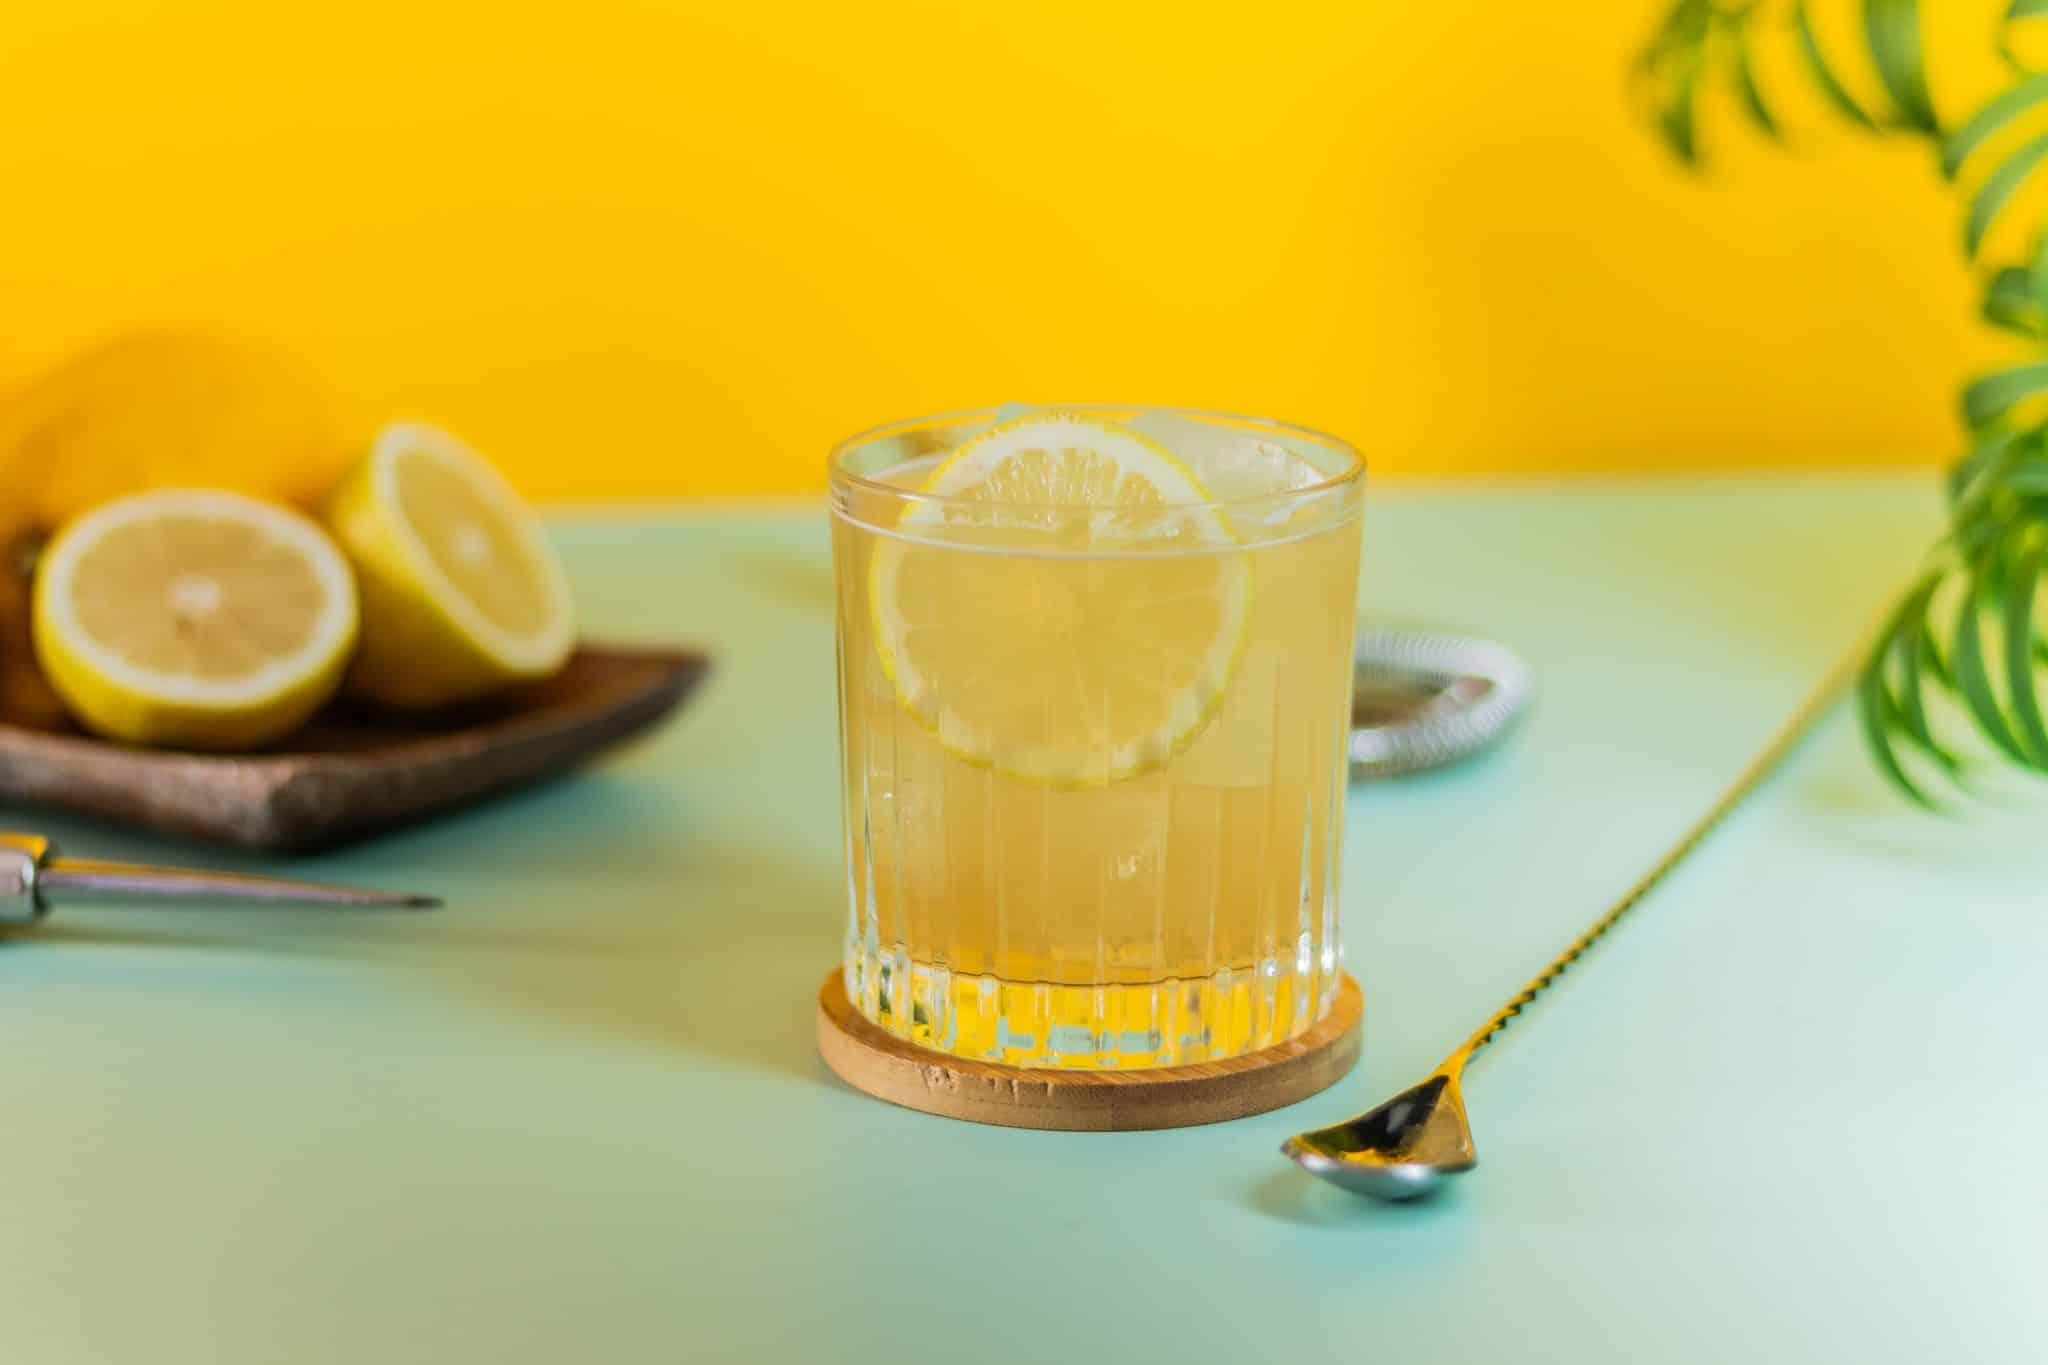 A side shot of an Amaretto Sour cocktail in an old fashioned glass on a wooden coaster with a bar spoon on the side placed on a turquoise table with two half lemons behind and in front of a yellow wall.